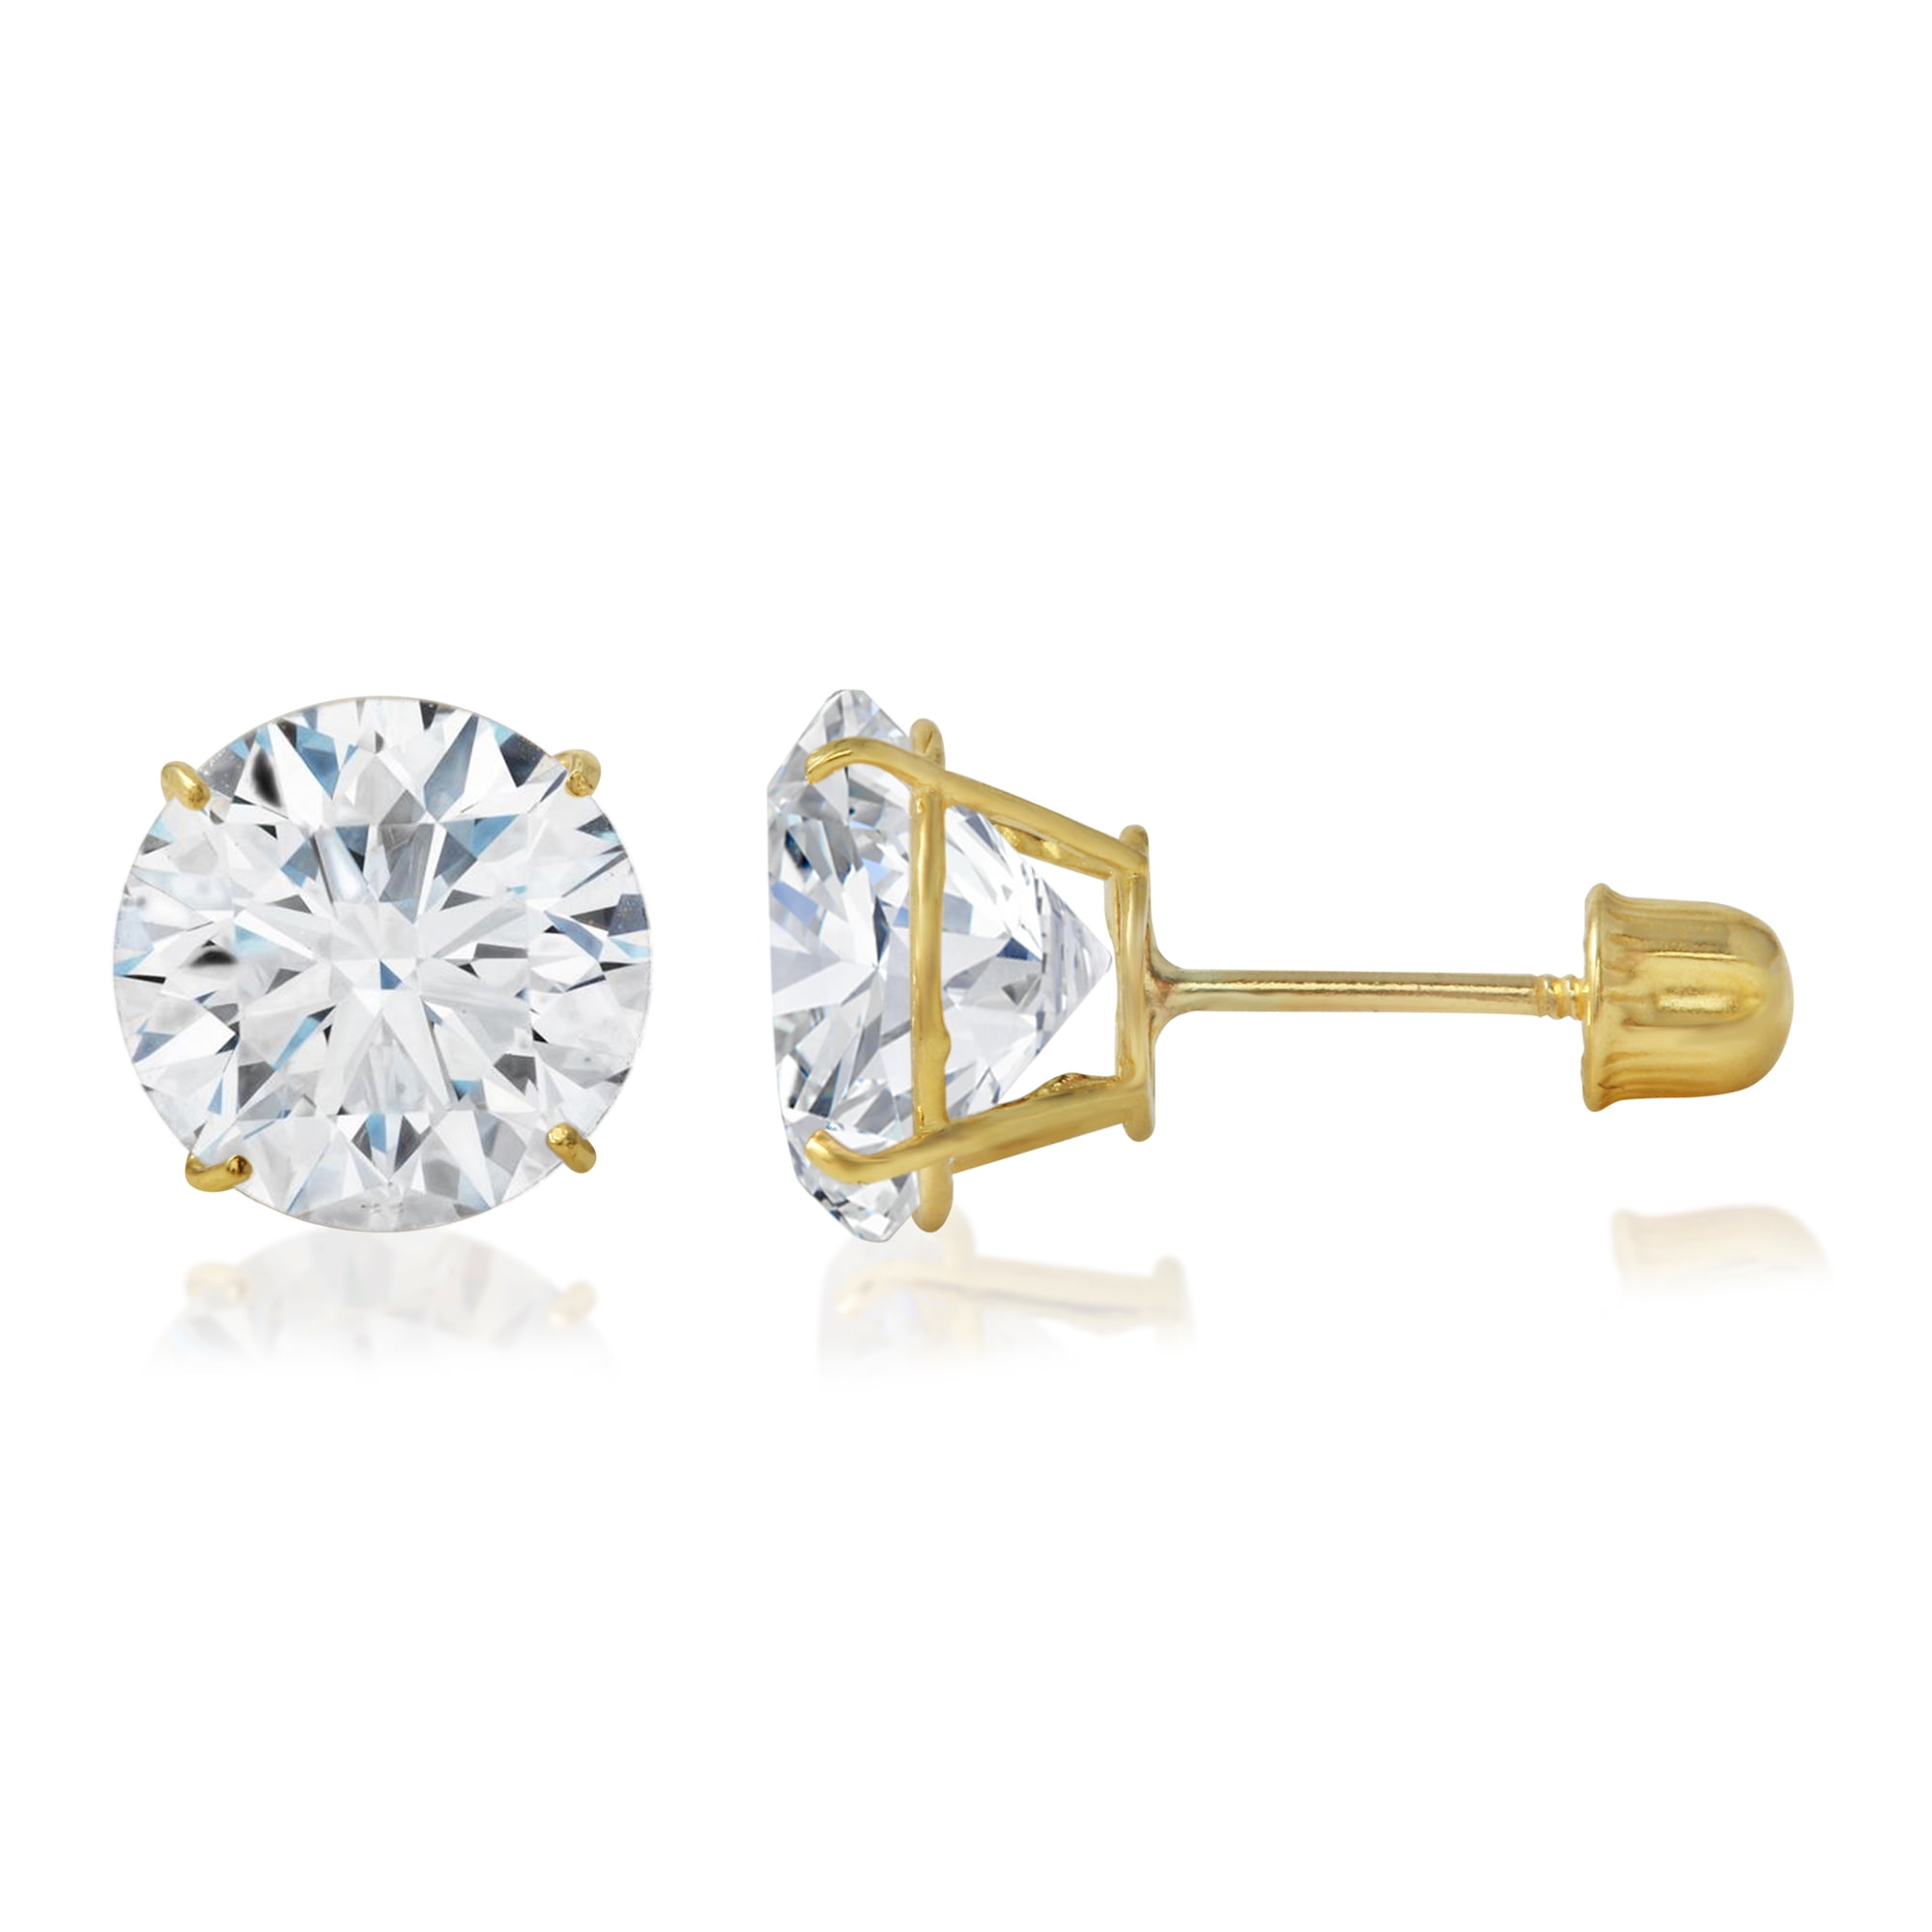 14K Yellow Gold Round Solitaire Cubic Zirconia CZ Stud Screw Back Earrings  - 2ct (8mm)